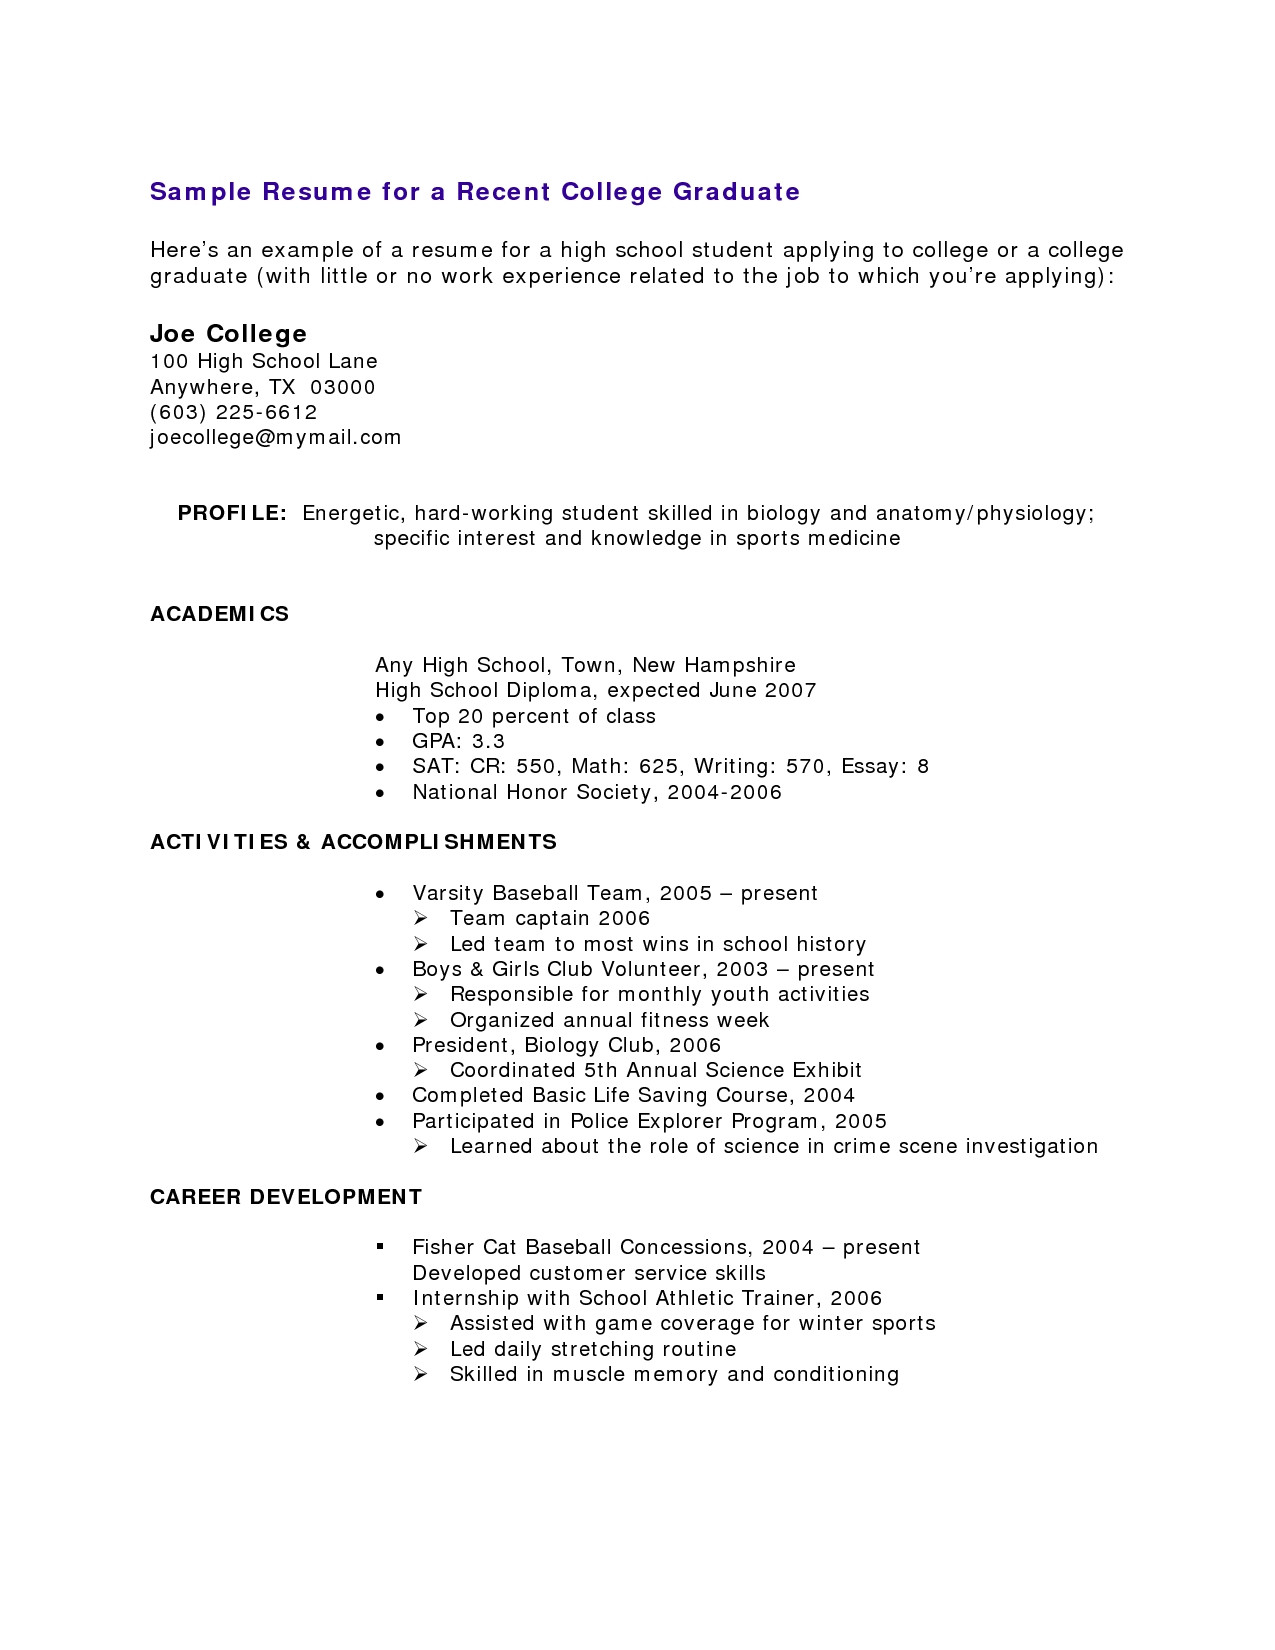 High School Resume Template with No Work Experience How to Make A Resume for Job with No Experience – Easy Resume Sample